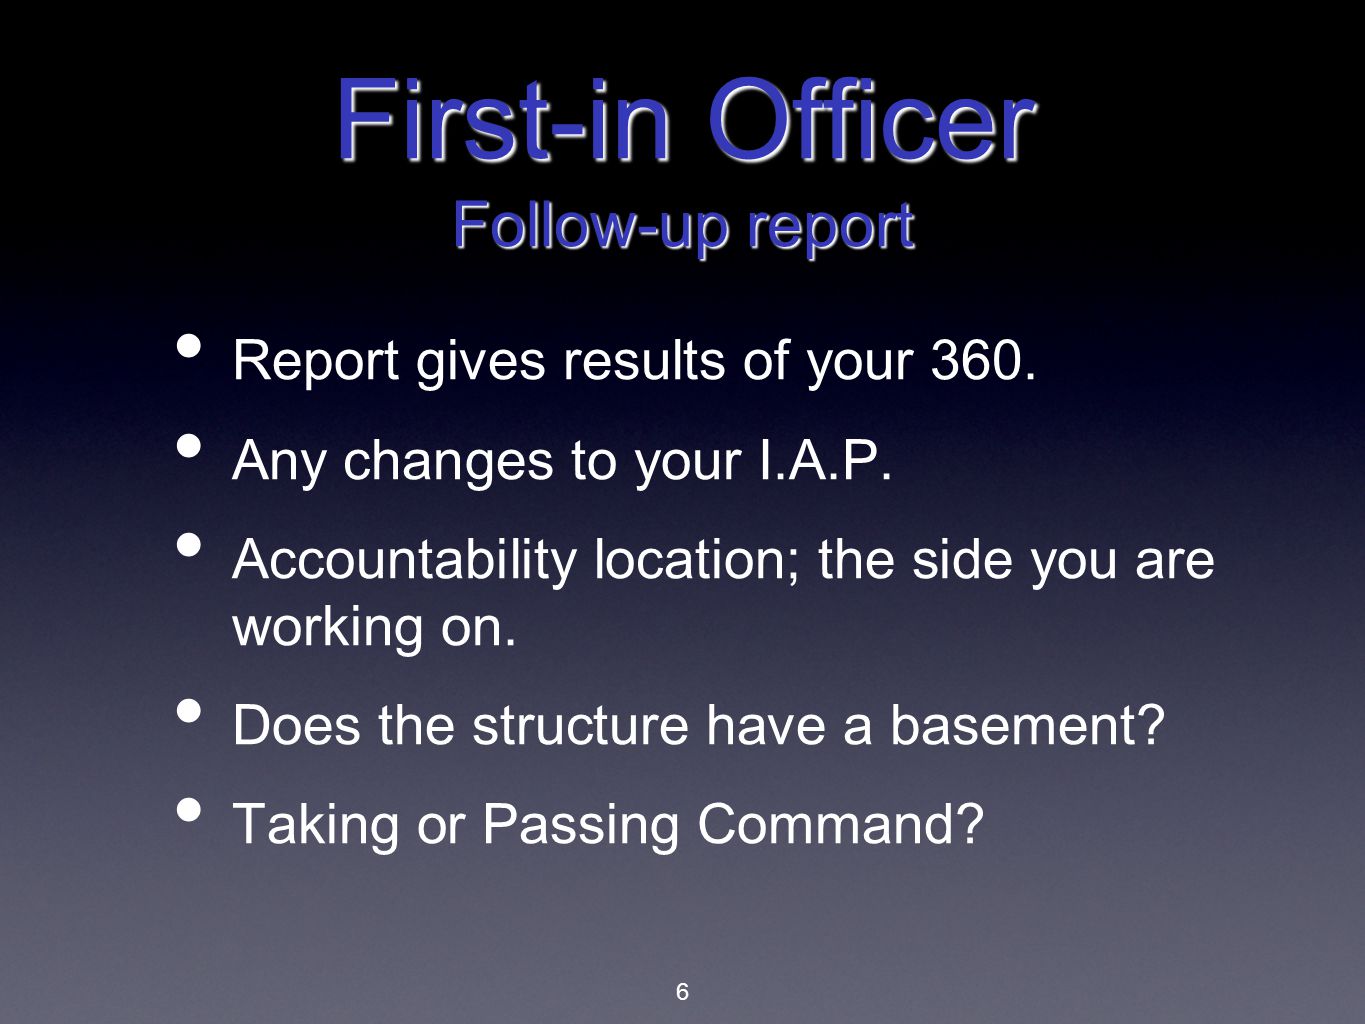 First-in Officer Follow-up report